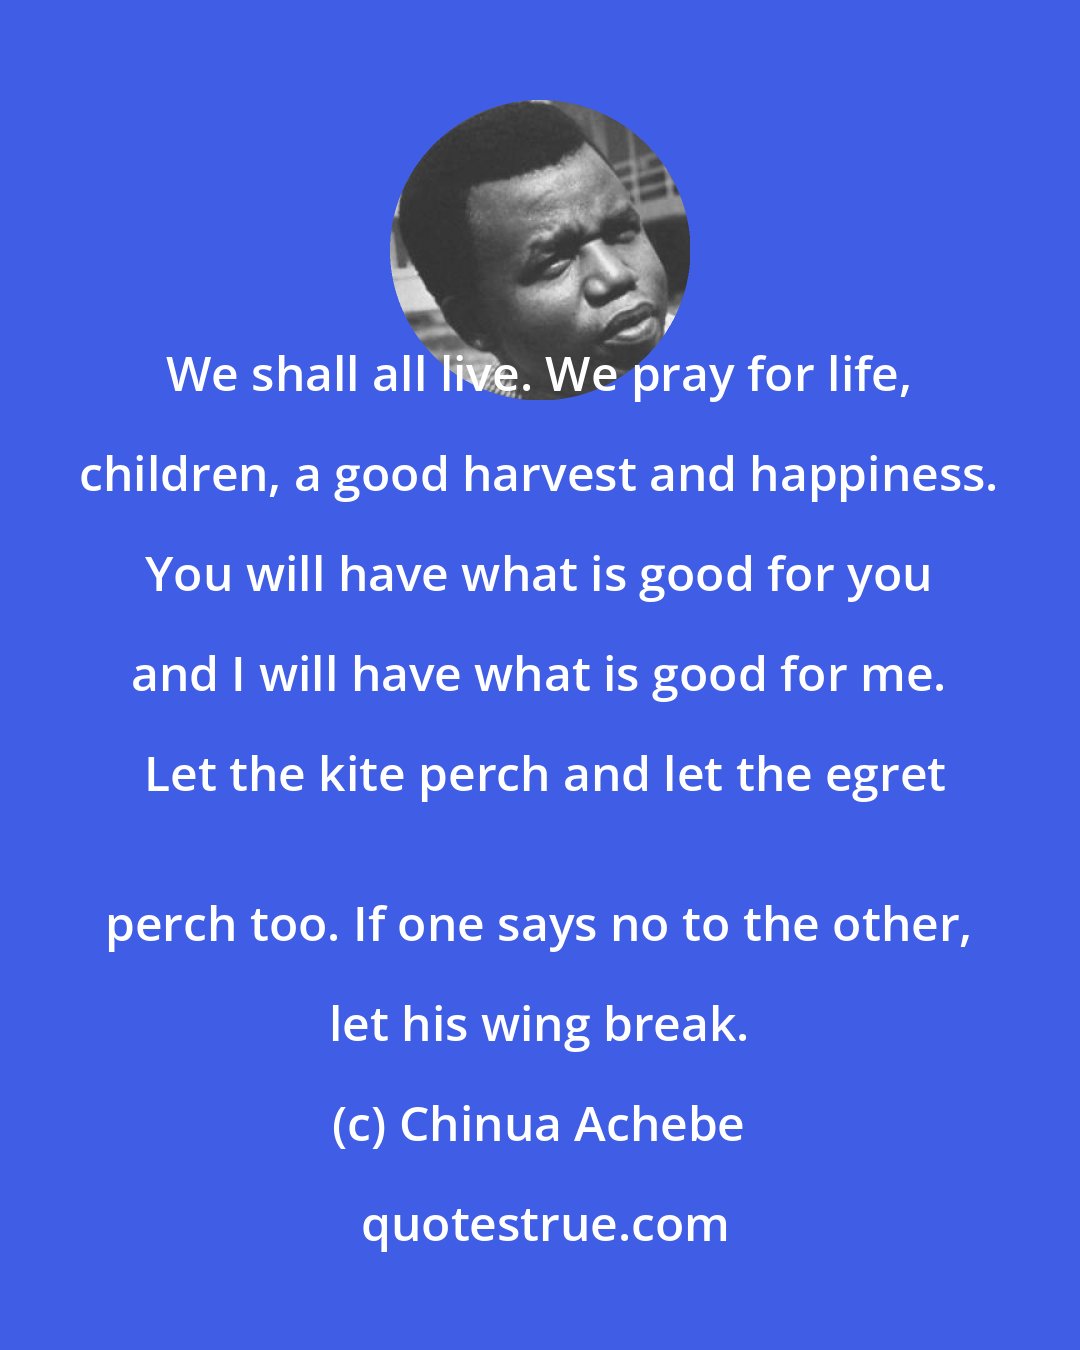 Chinua Achebe: We shall all live. We pray for life, children, a good harvest and happiness. You will have what is good for you and I will have what is good for me. Let the kite perch and let the egret
 perch too. If one says no to the other, let his wing break.